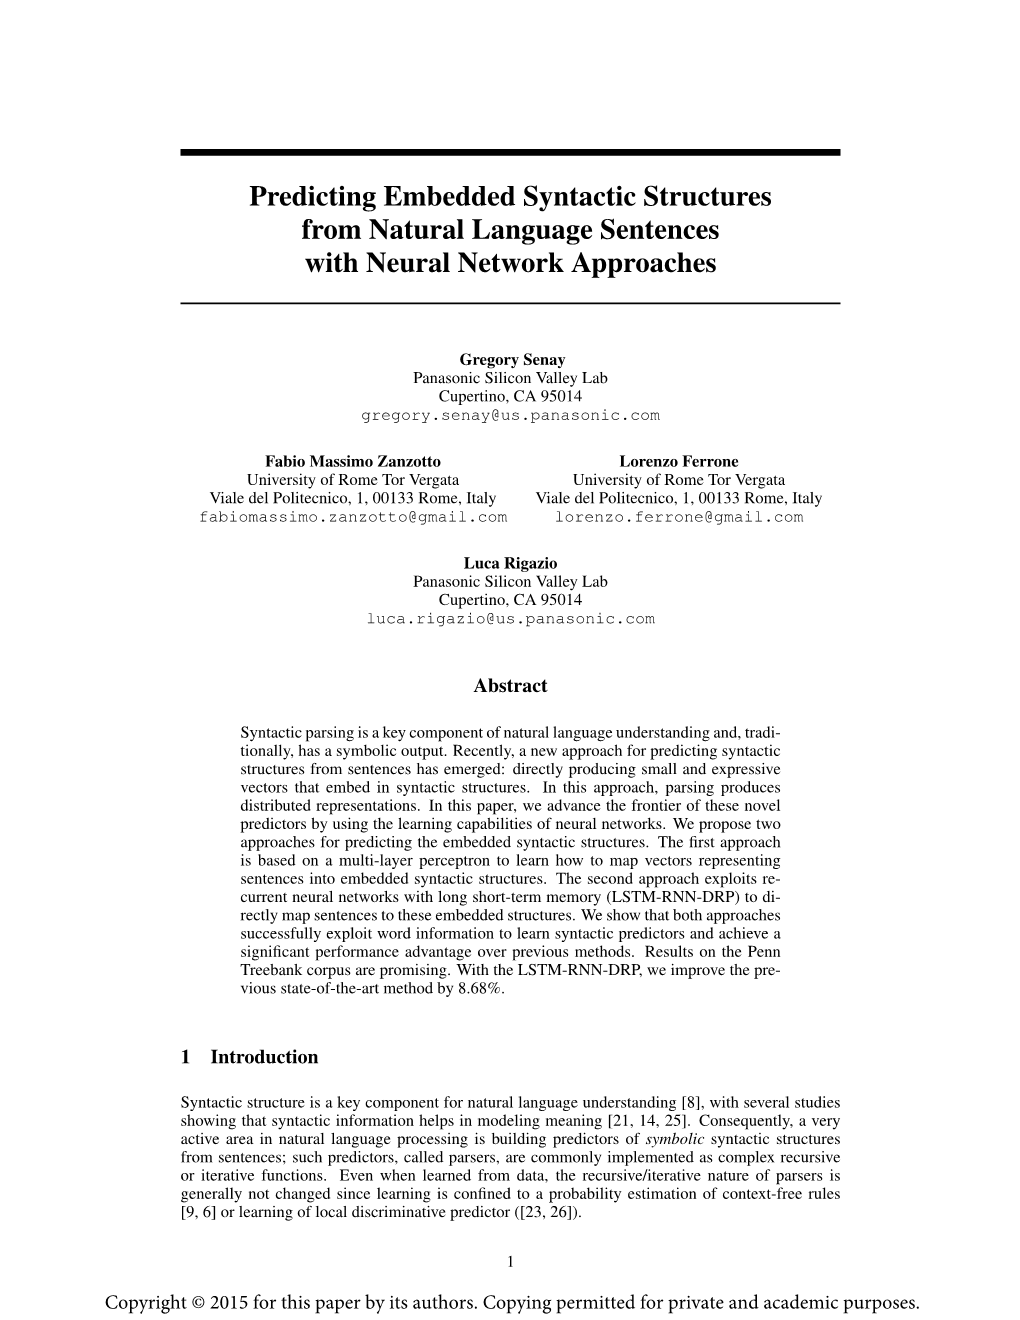 Predicting Embedded Syntactic Structures from Natural Language Sentences with Neural Network Approaches